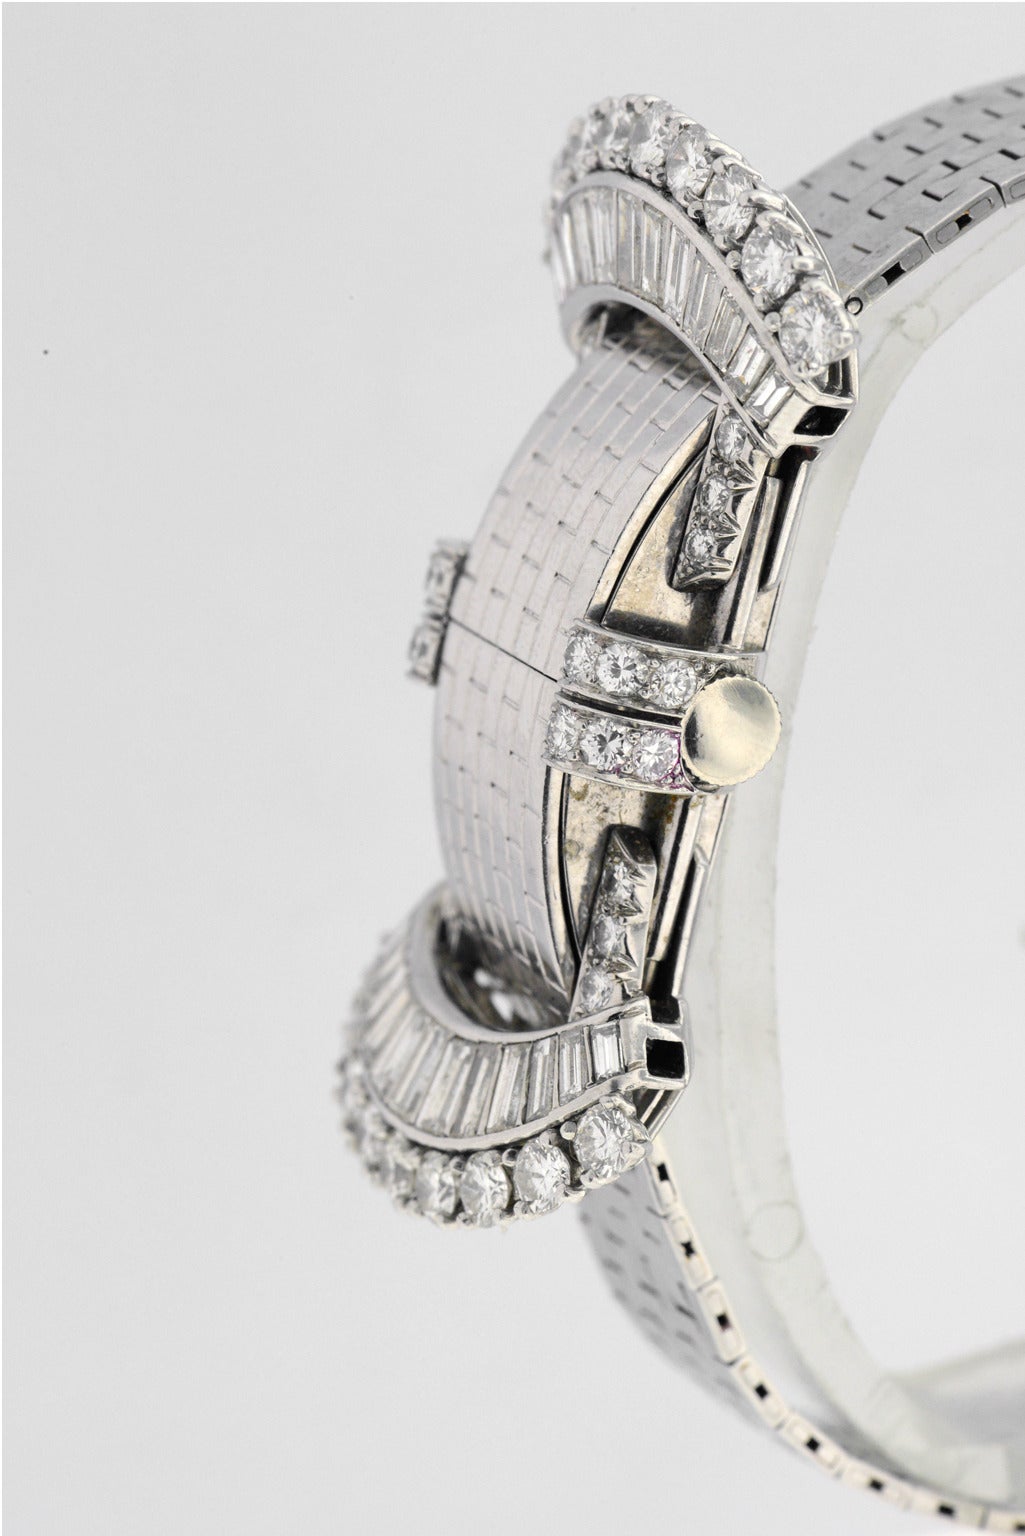 Hamilton Perry Lady's Platinum Diamond Watch In Excellent Condition For Sale In Hartsdale, NY